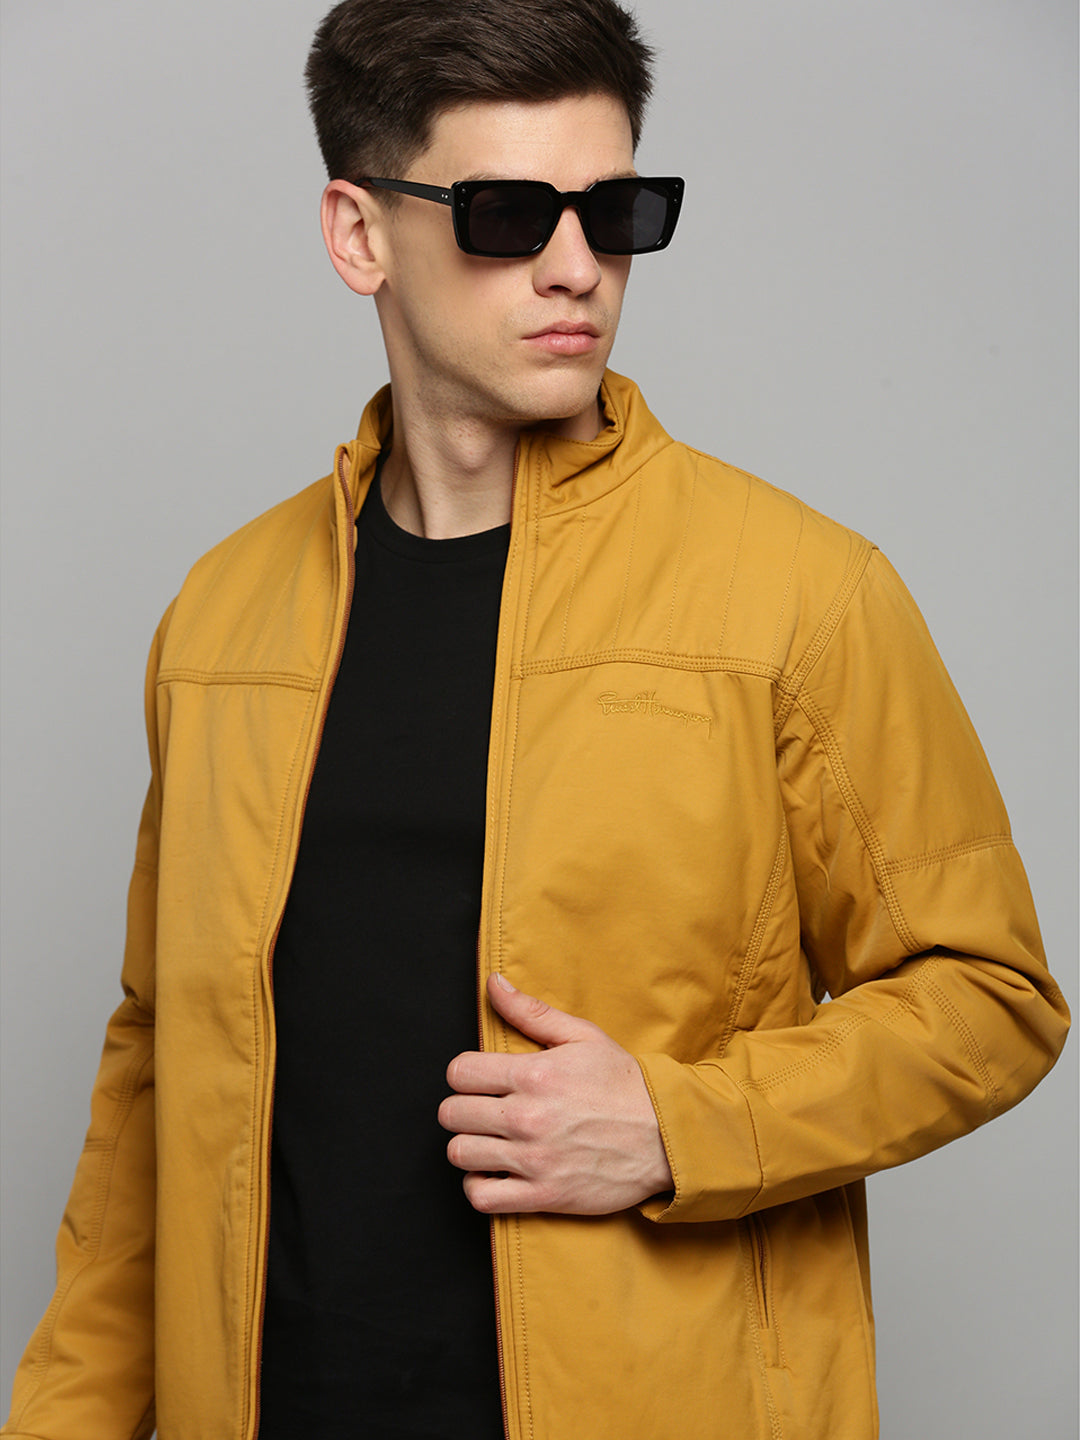 Men Yellow Solid Casual Jacket